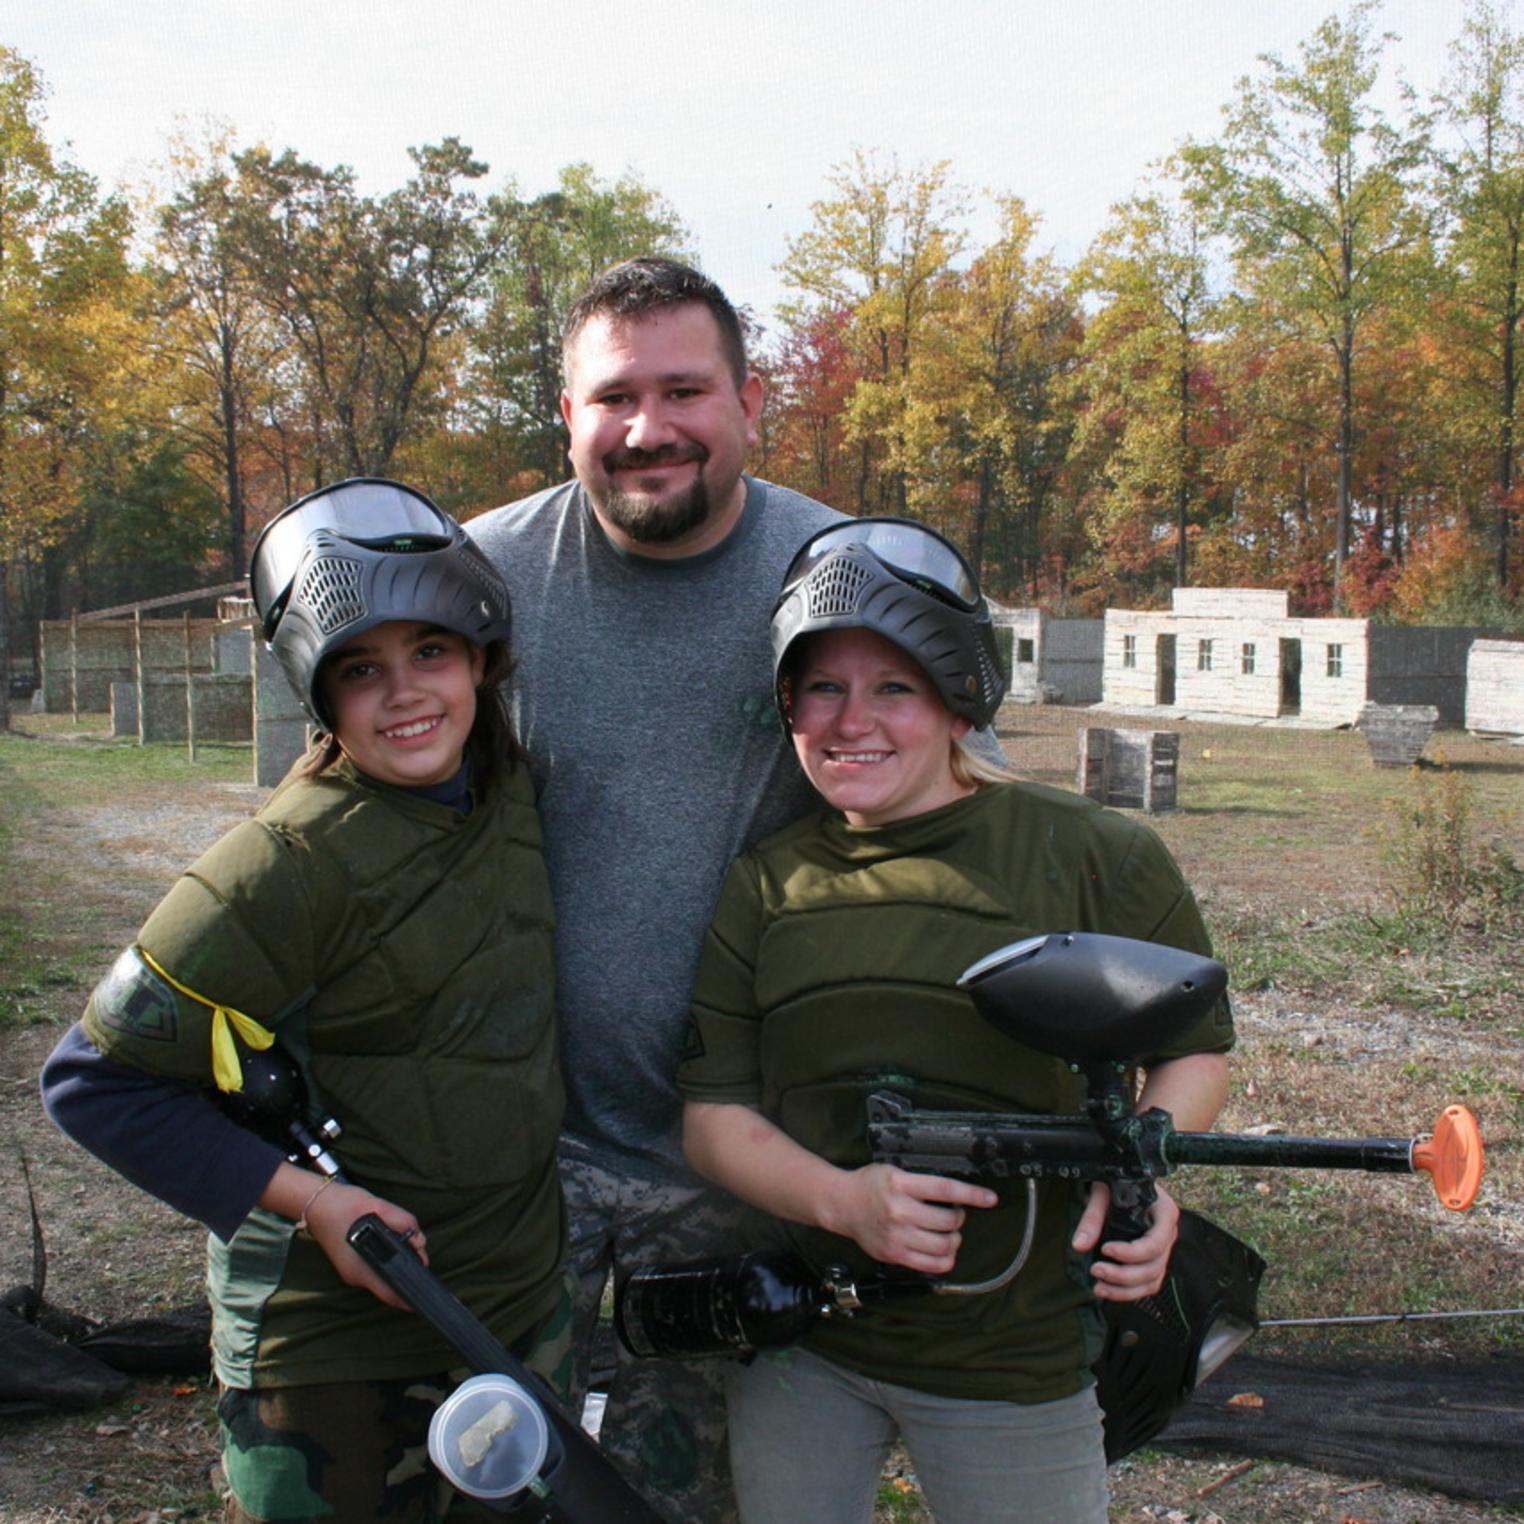 Paintball birthday parties in Central PA at Roundtop Mountain Resort